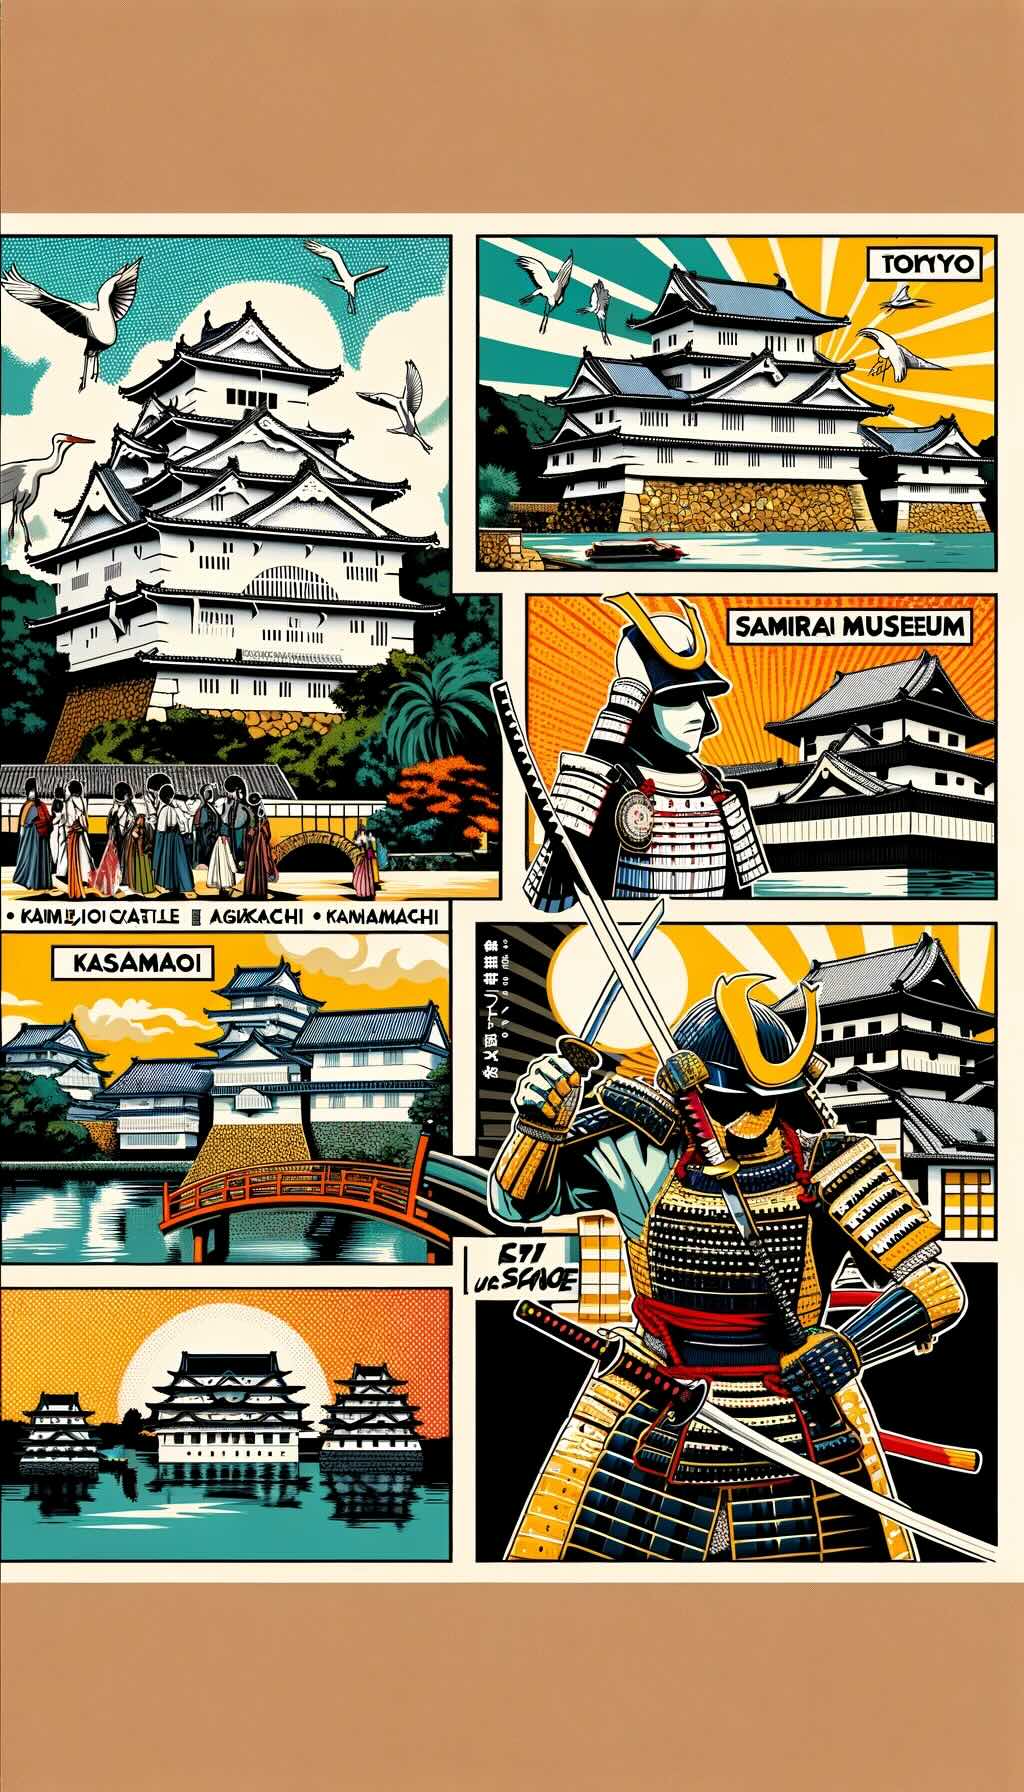 Key samurai-related sites across Japan, capturing the historical significance and architectural beauty of these locations. It vividly depicts Himeji Castle in Hyogo, the historic samurai district of Nagamachi in Kanazawa, the Samurai Museum in Tokyo, the restoration of Kumamoto Castle, the Tsuruga Castle and Byakkotai Memorial in Aizu-Wakamatsu, and Kyoto's Nijo Castle with its unique 'nightingale floors'. The artwork reflects the rich samurai heritage of Japan in a vibrant and colorful style, highlighting the importance of these sites in understanding samurai history and culture